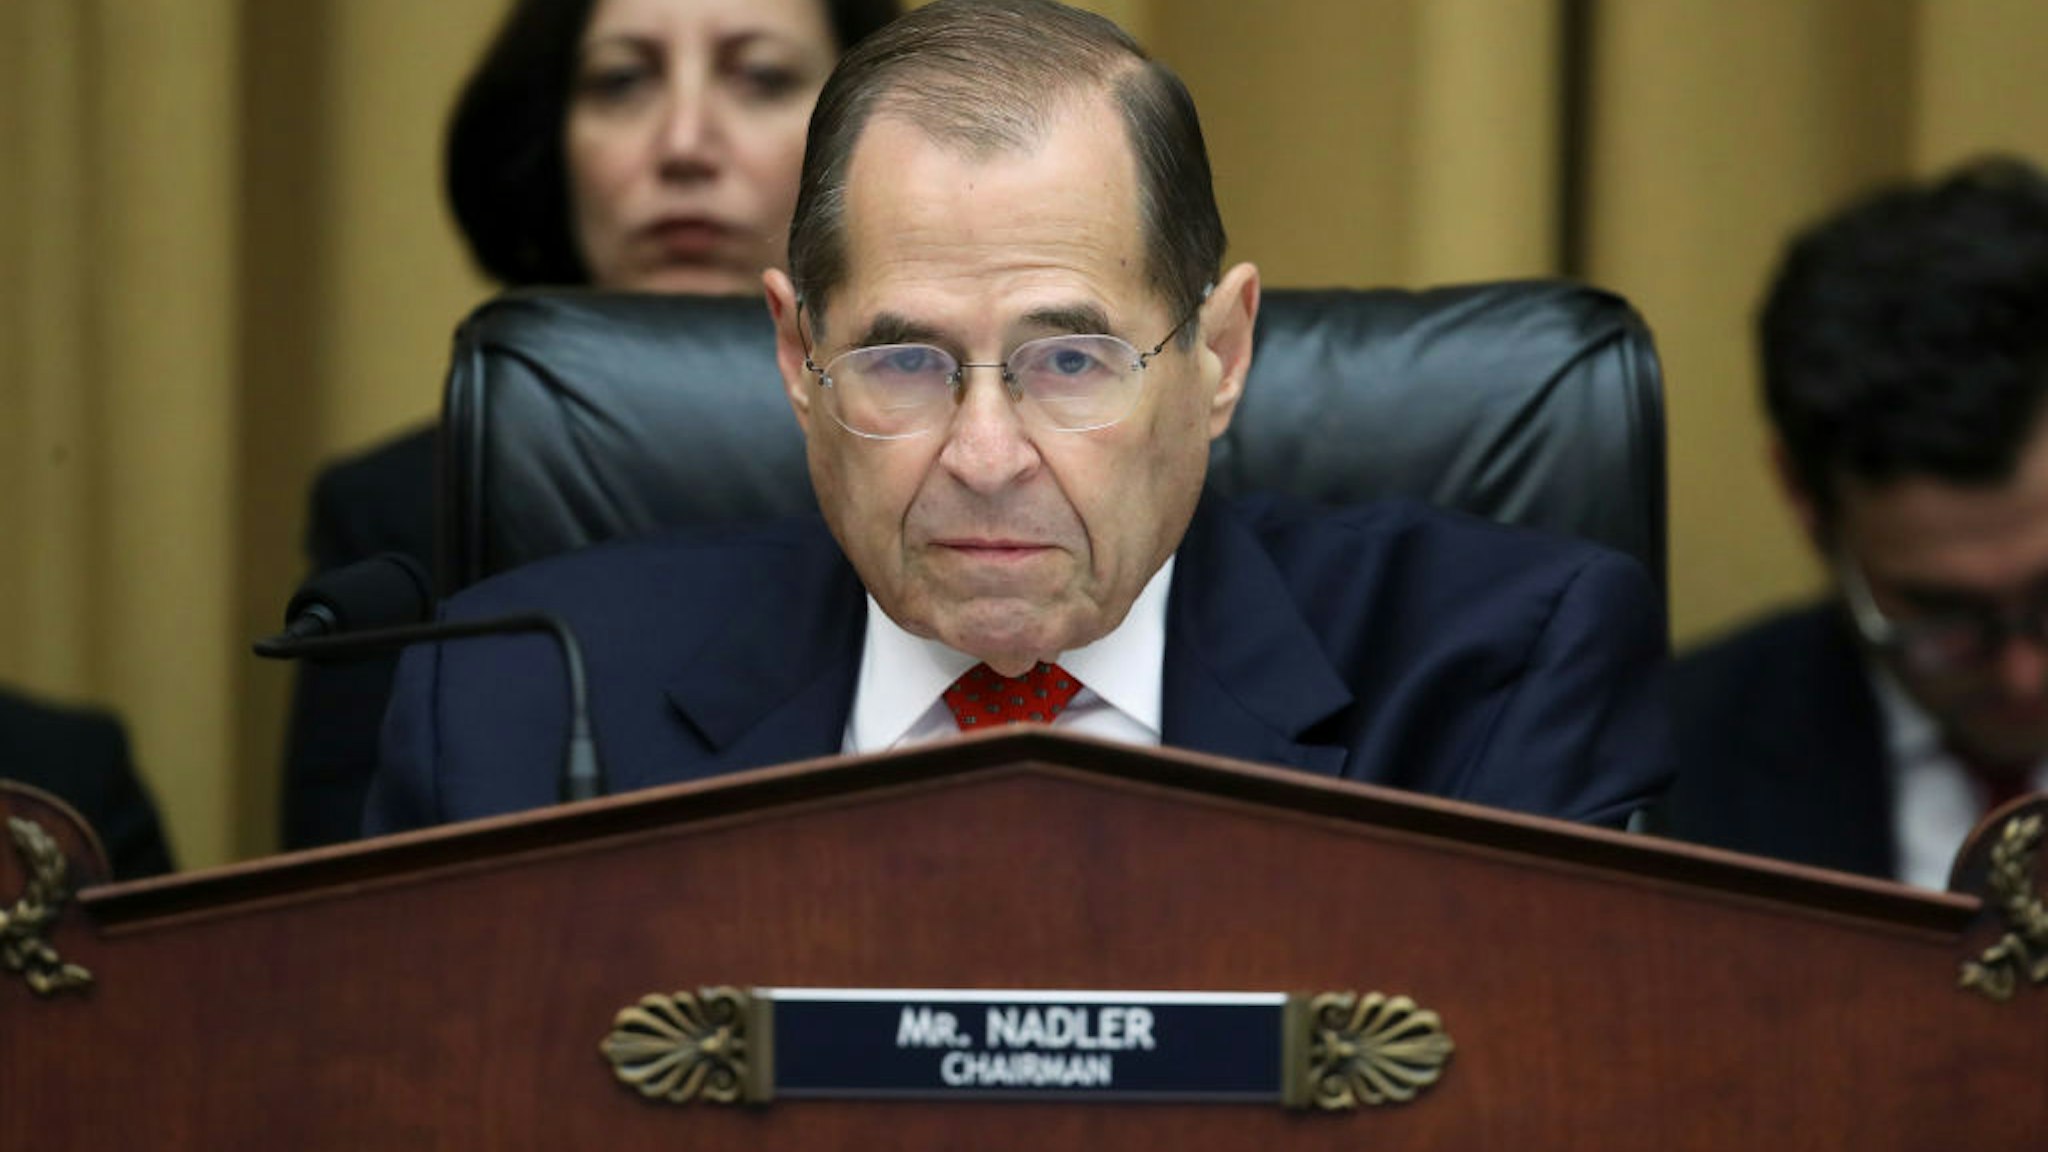 WASHINGTON, DC - JULY 24: Chairman of the House Judiciary Committee Rep. Jerry Nadler (D-NY) questions former Special Counsel Robert Mueller as he testifies about his report on Russian interference in the 2016 presidential election in the Rayburn House Office Building July 24, 2019 in Washington, DC. Mueller, along with former Deputy Special Counsel Aaron Zebley, will later testify before the House Intelligence Committee in back-to-back hearings on Capitol Hill. (